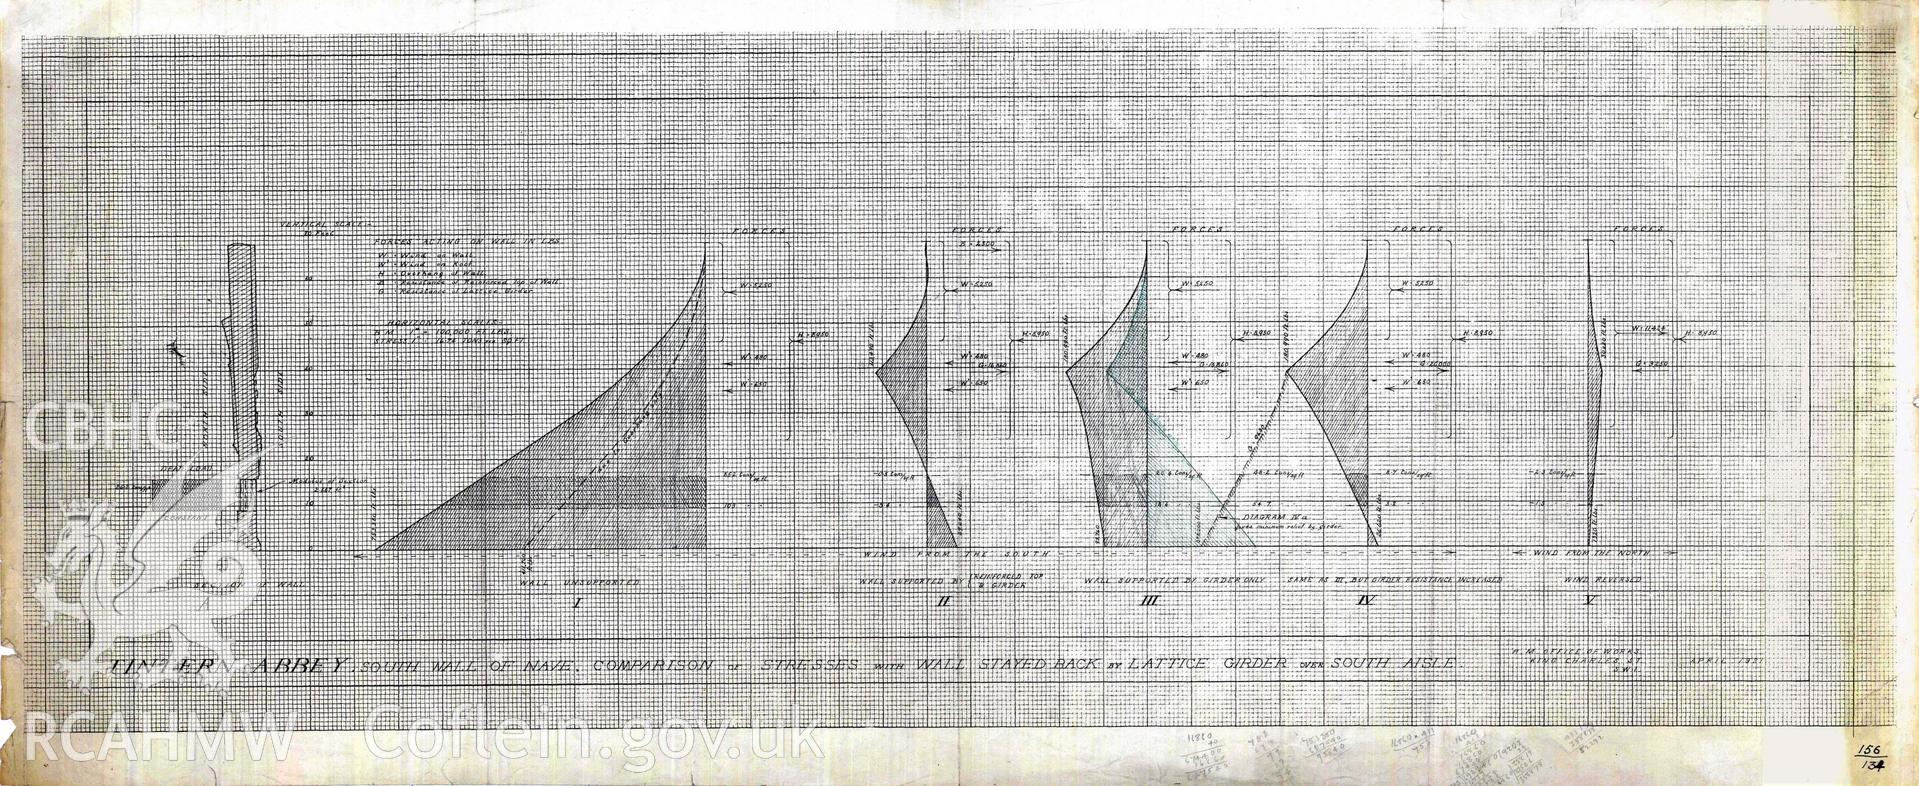 Cadw guardianship monument drawing of Tintern Abbey. Nave S Wall comparison of stresses. Cadw ref. No. 156/134. Various scales.